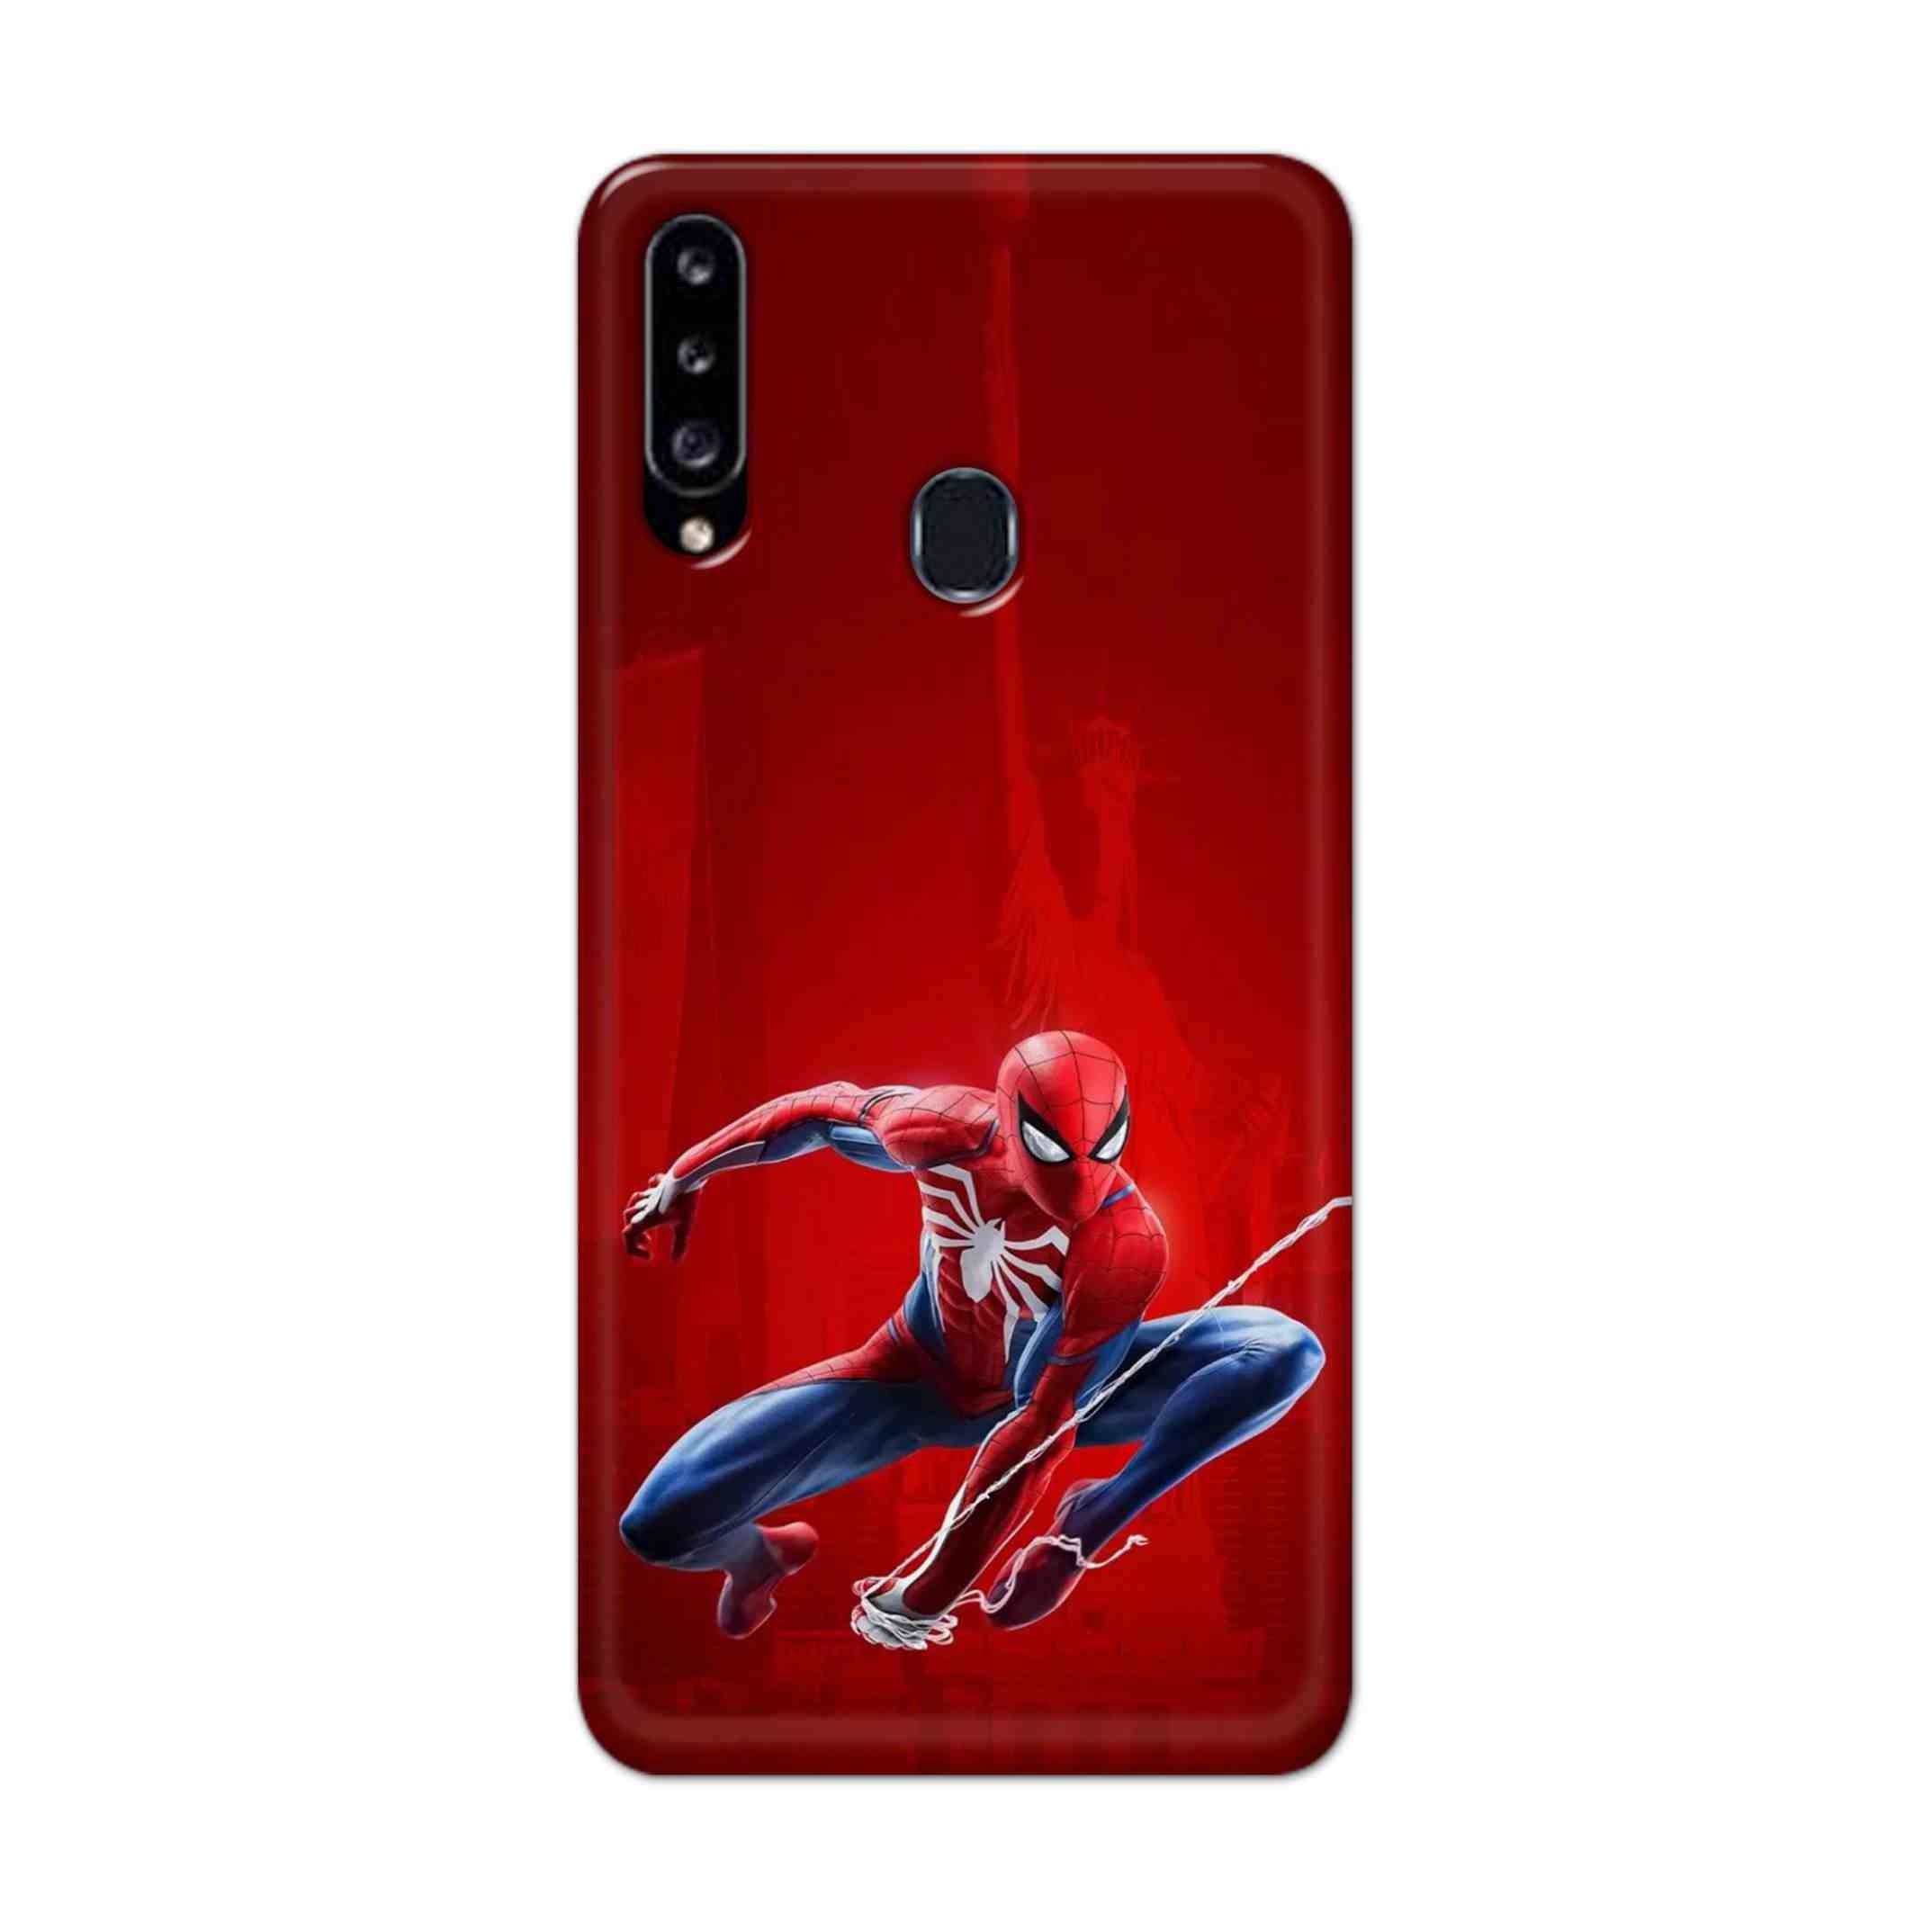 Buy Spiderman Hard Back Mobile Phone Case Cover For Samsung Galaxy A21 Online